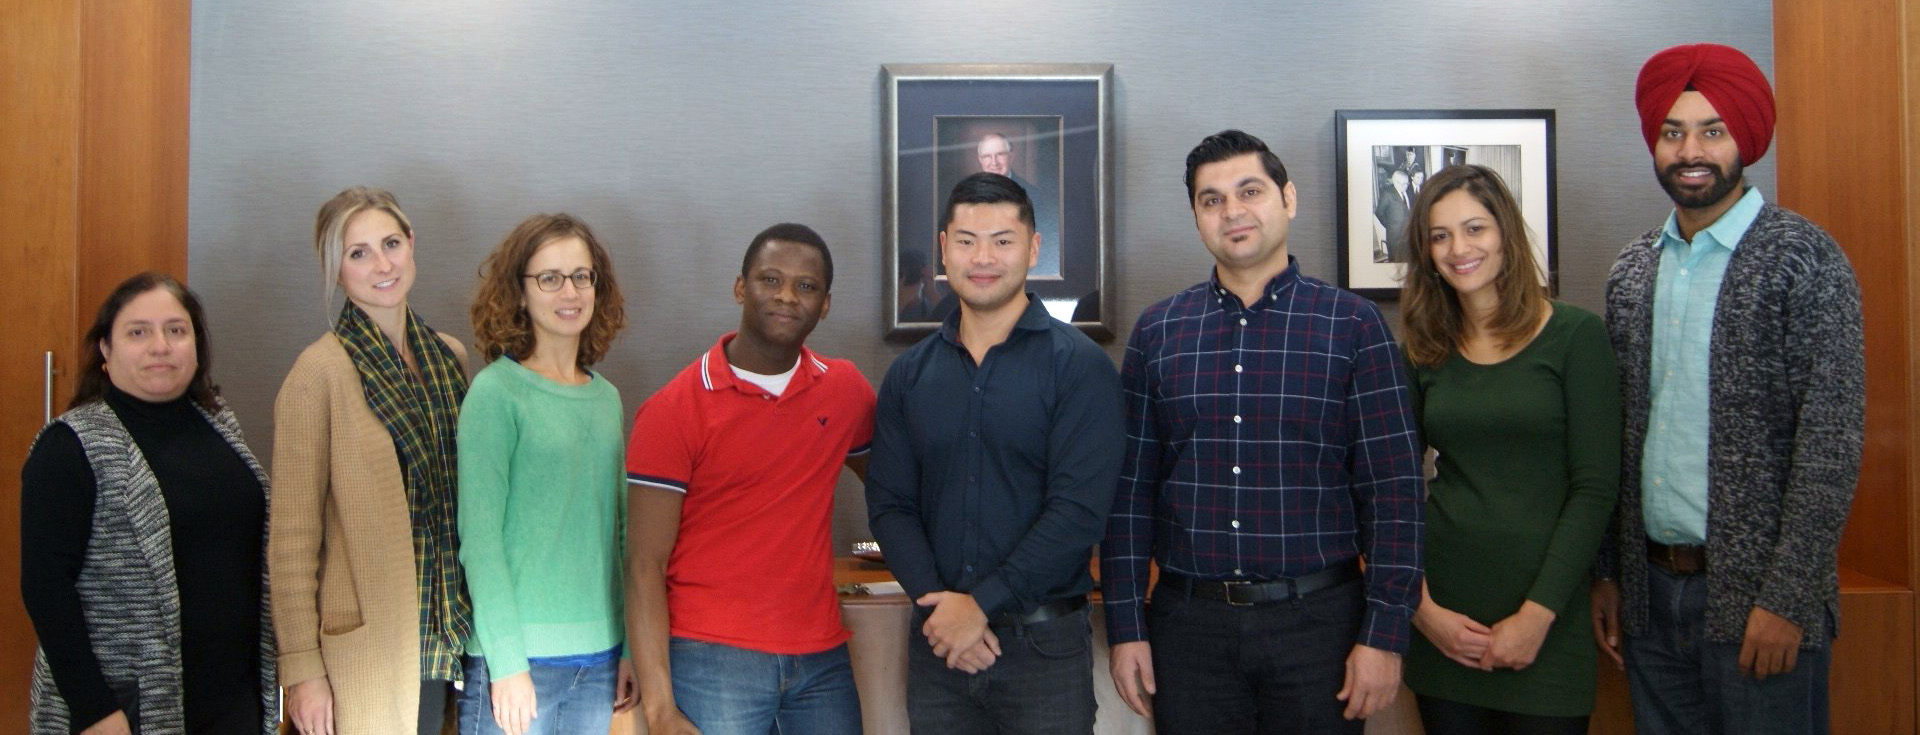 From left to right: Adriana Angarita Fonseca, Dr. Amanda Froehlich Chow, Robyn Reist, Dr. Oluwafemi Oluwole, Dr. Marcus Yung, Dr. Behzad Bashiri, Dr. Amanda Florentina Do Nascimento and Upkardeep Pandher. (Absent from the photo: Ulfat Ara Khanam and Maurice M’bang’ombe)